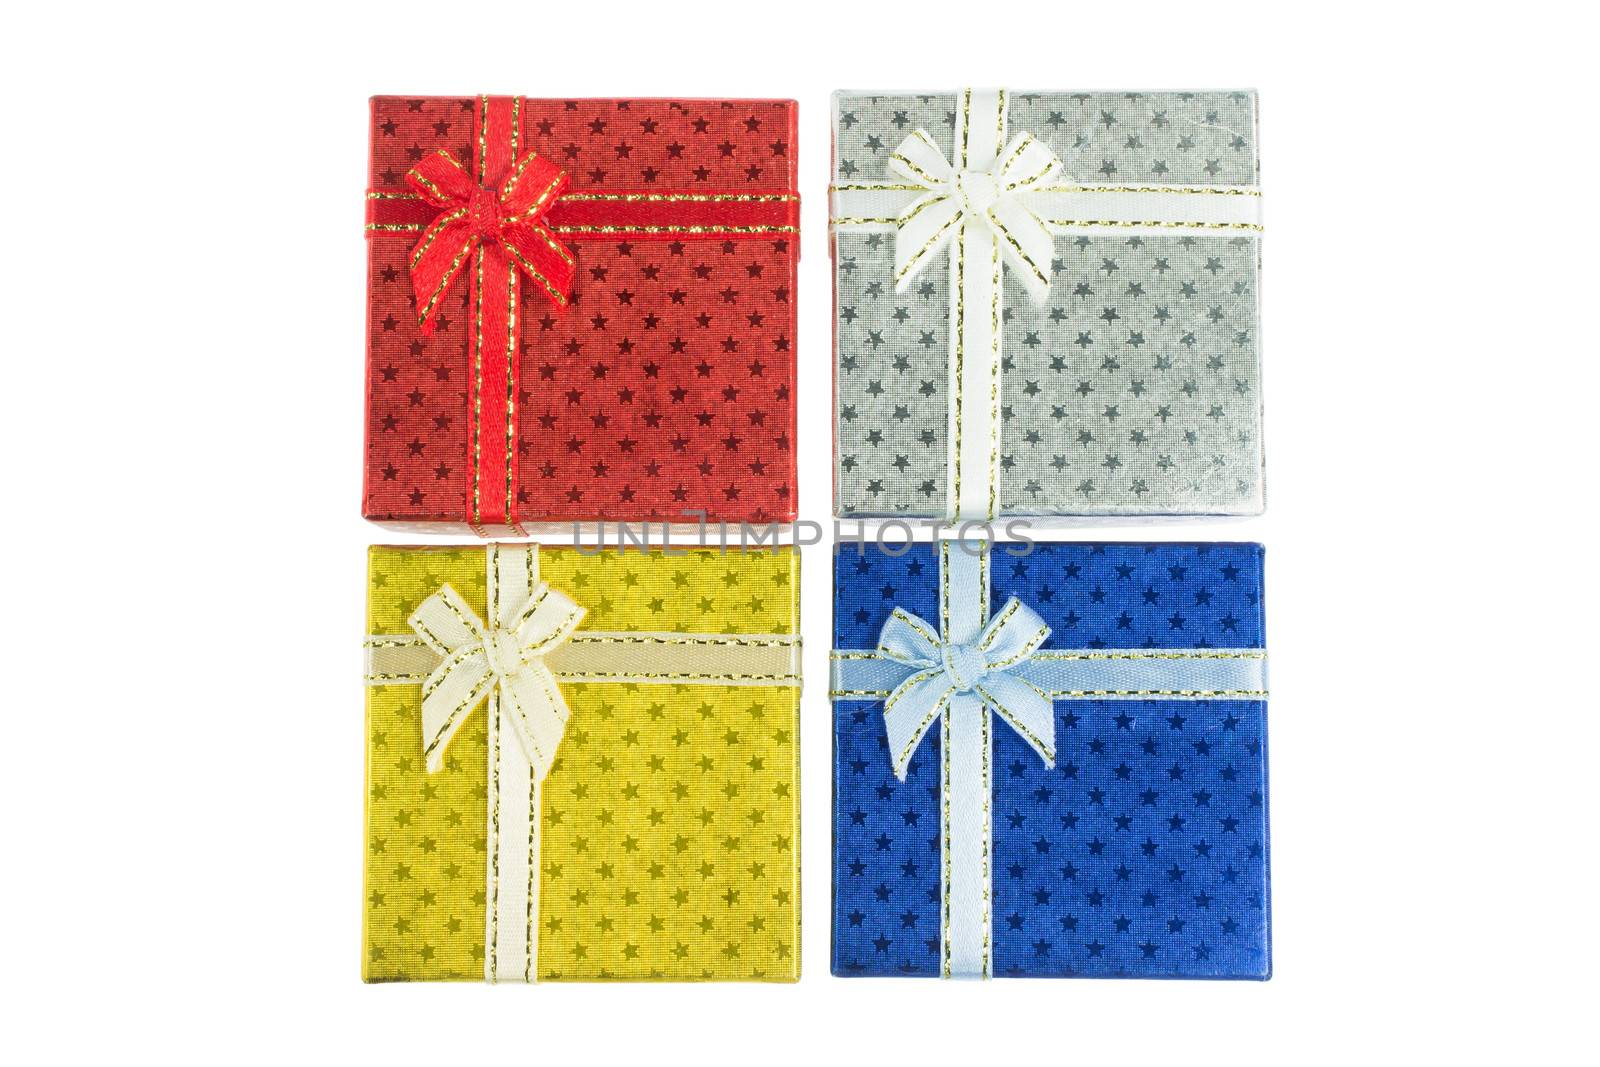 4 Gift box set in bird's eye view for Christmas, Thanksgiving, Birthday, Holiday, New year and other important festival that consist of red, silver, gold and blue color.